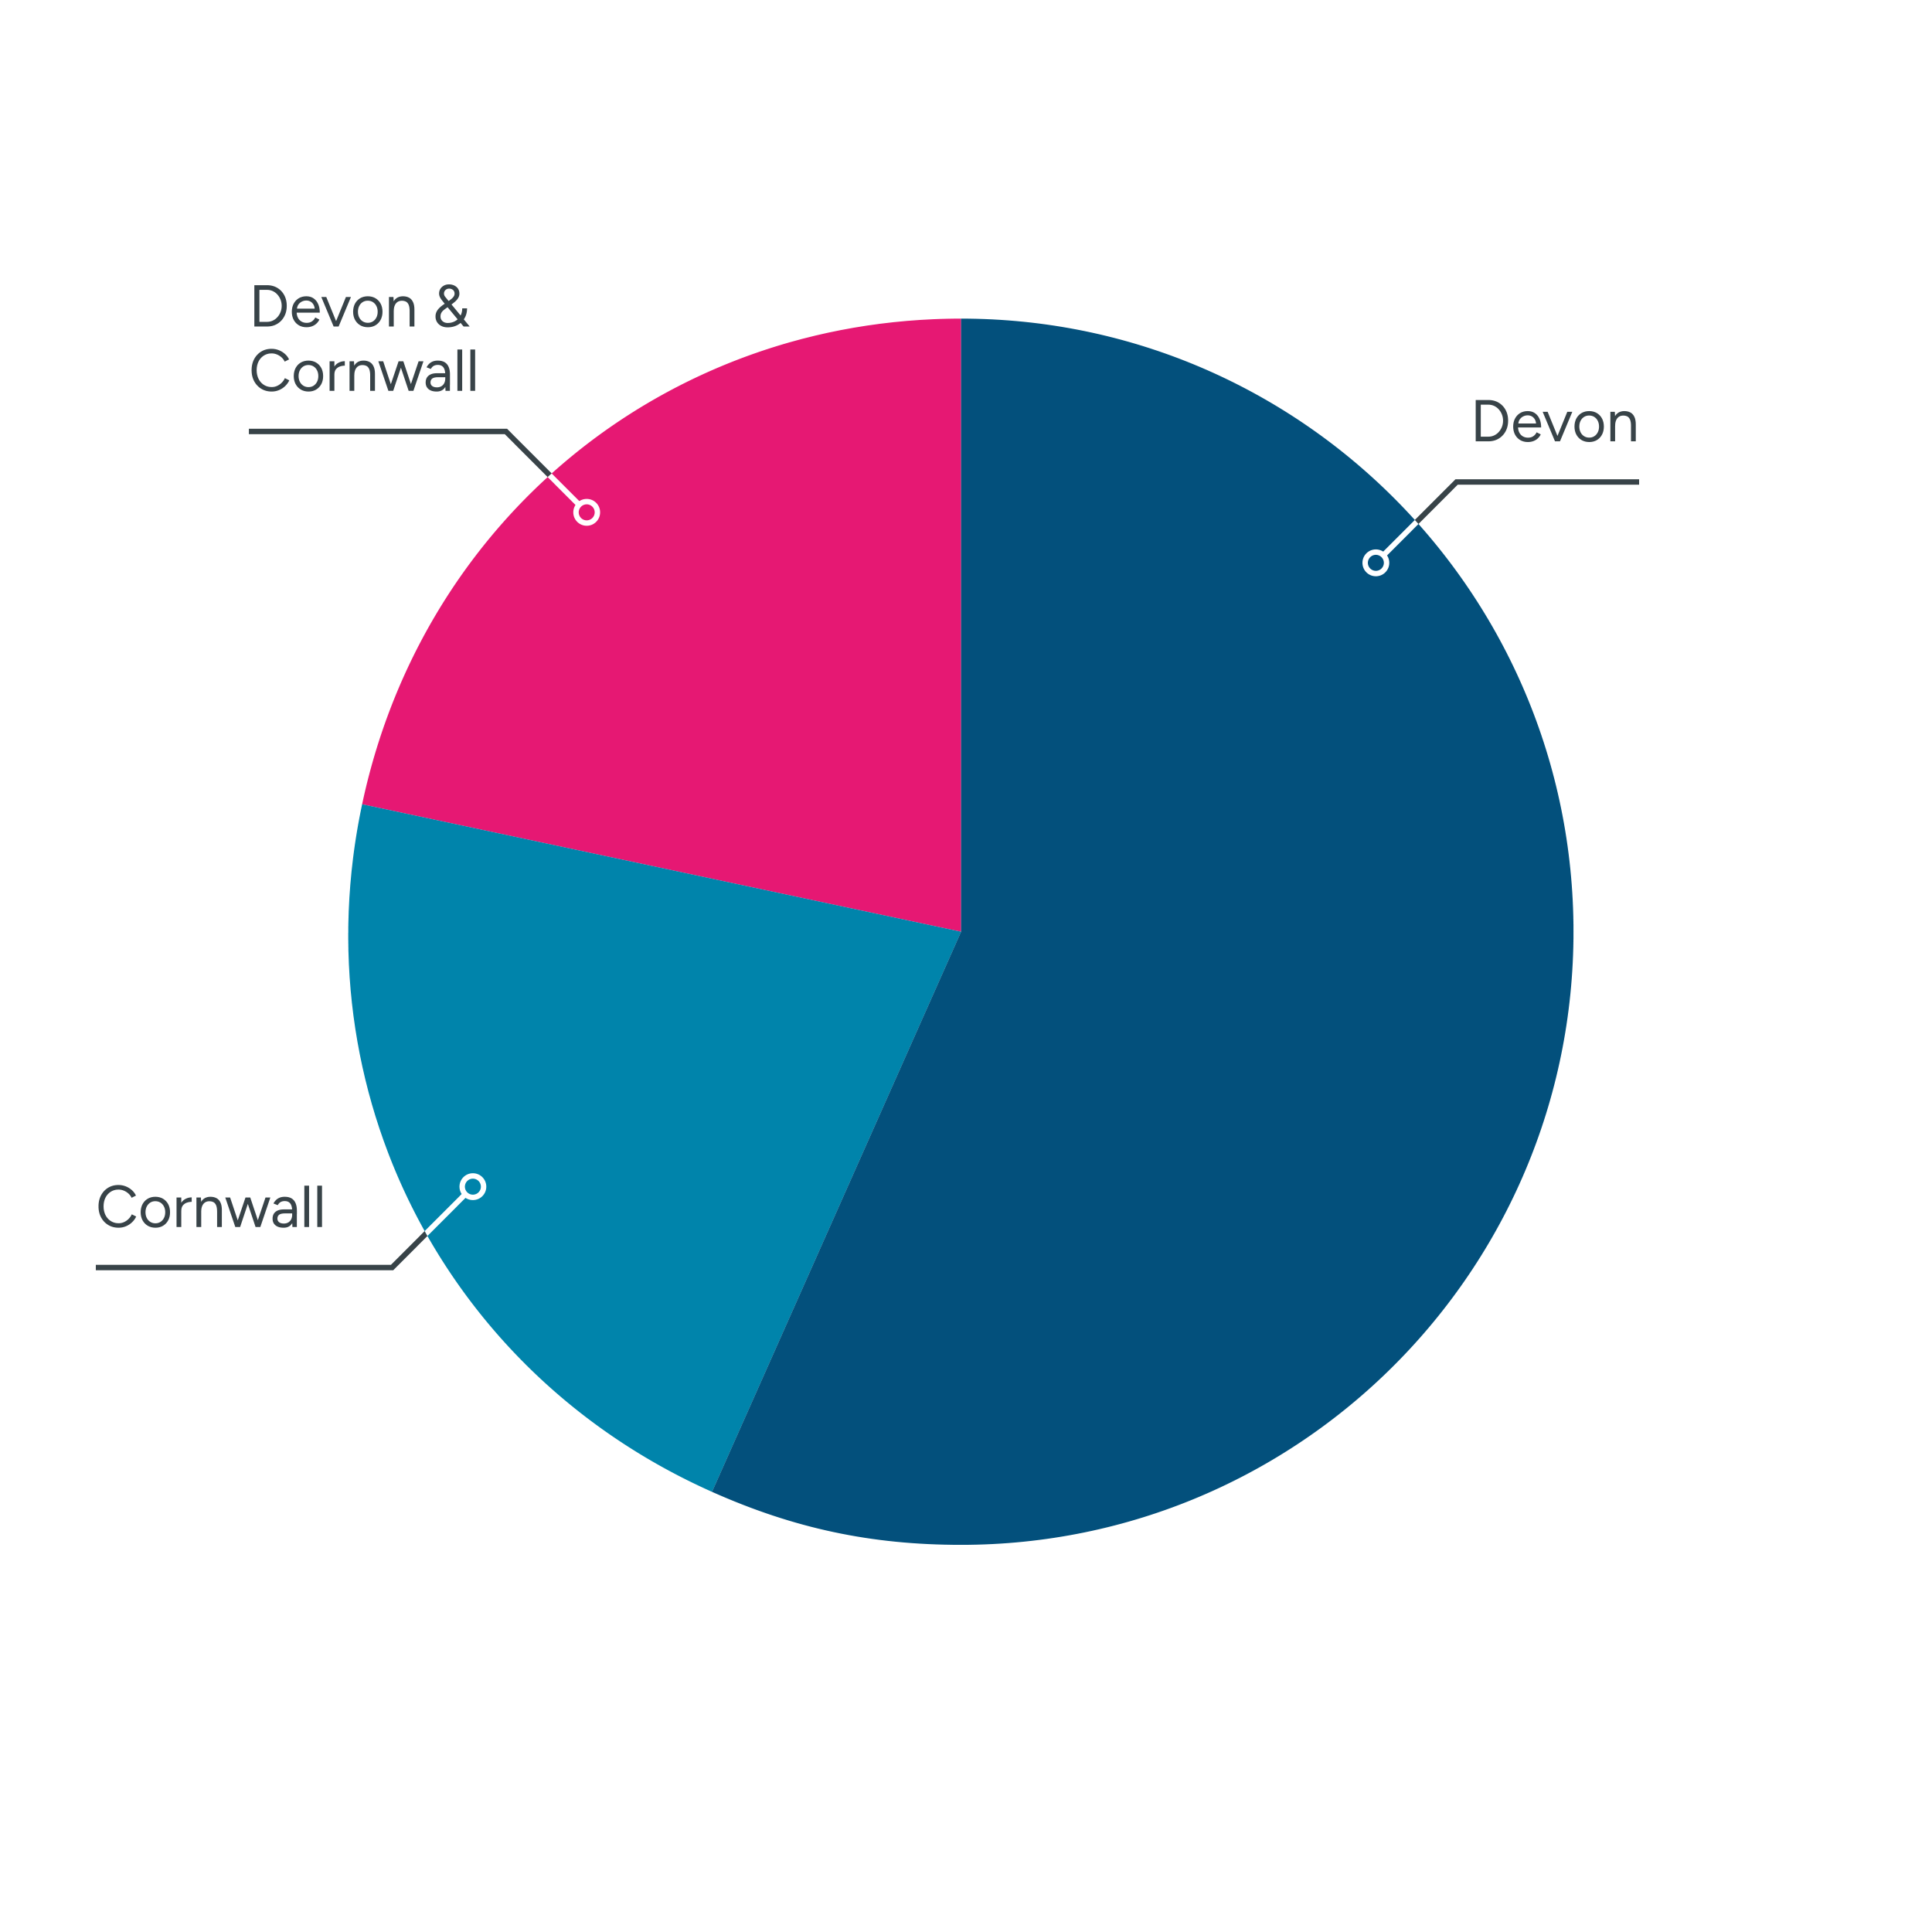 Pie chart illustrating the funding split between areas with 34 in Devon totalling £336,849 and 13 in Cornwall totalling £123,540